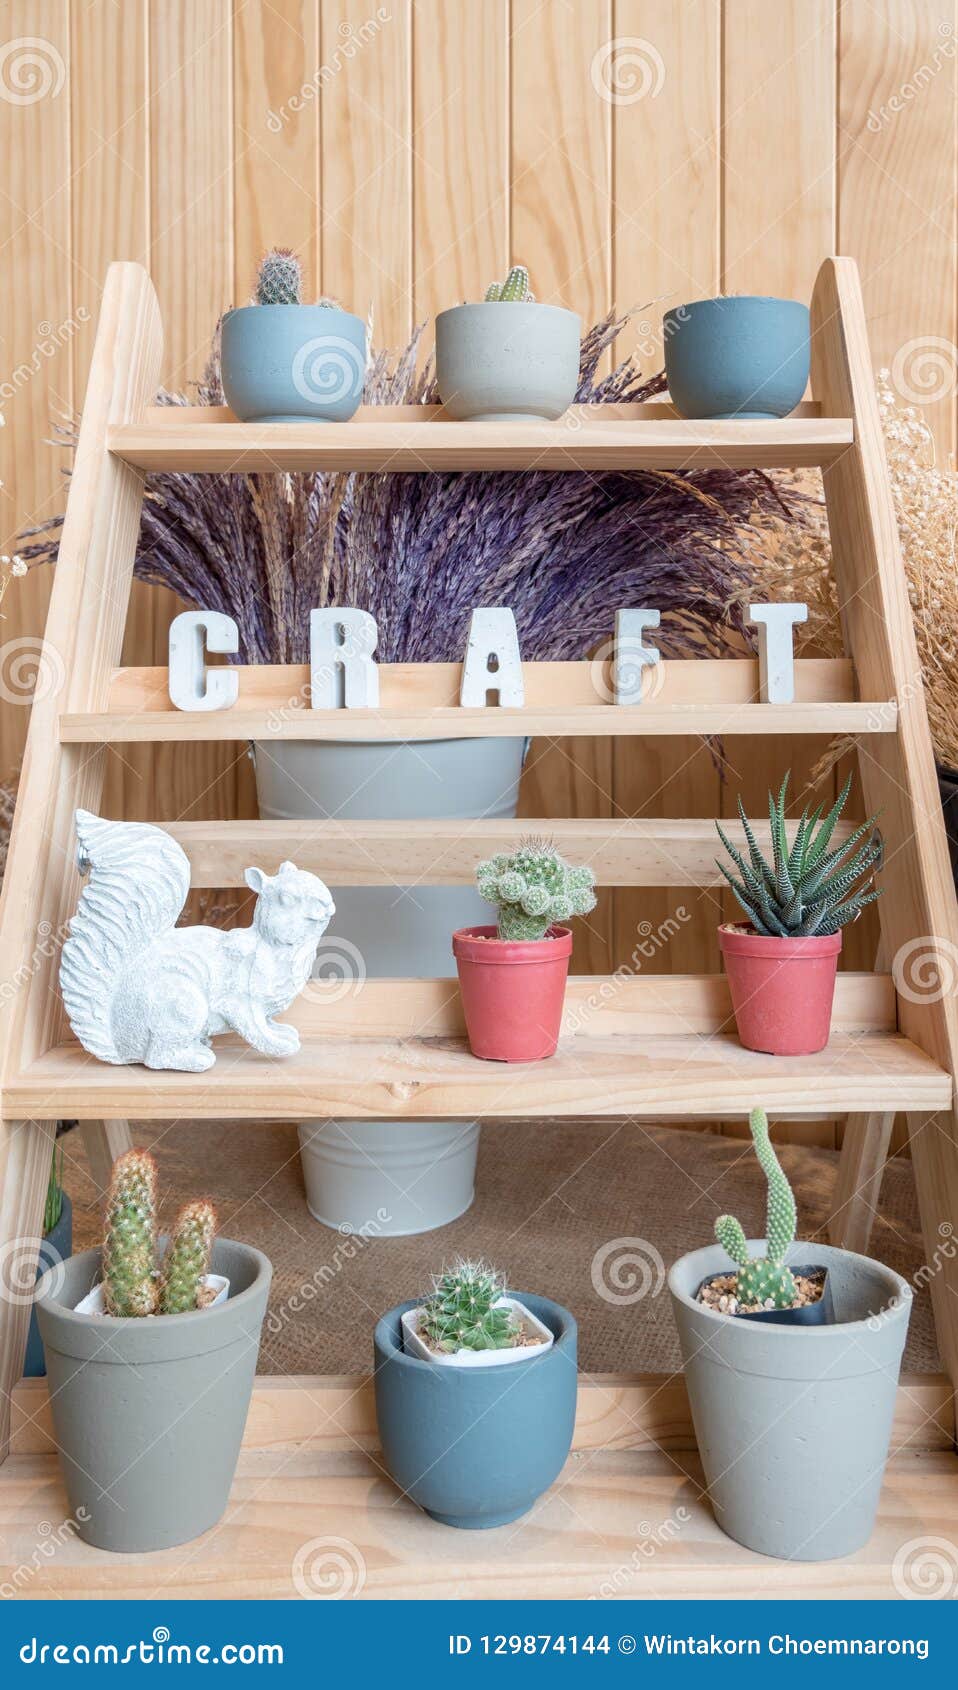 A Small Cactus Pot Displayed on Wooden Shelf in Cafe Stock Photo - of decorative, interior: